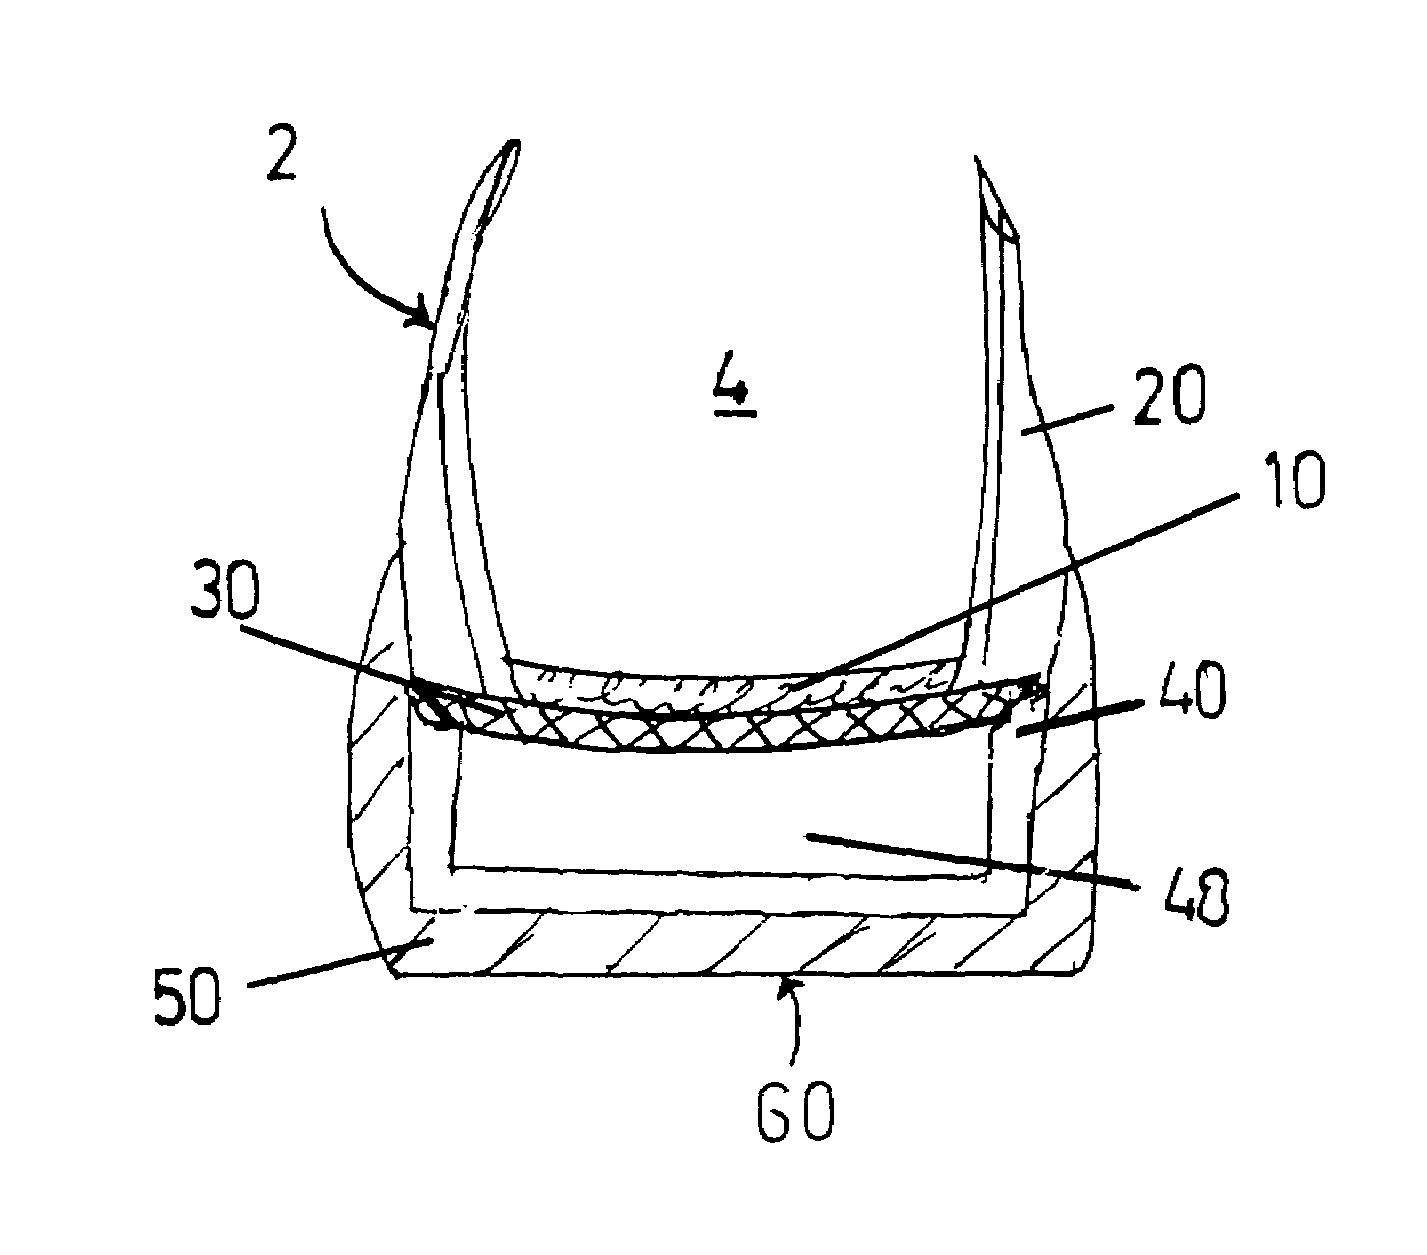 Foot cushioning construct and system for use in an article of footwear